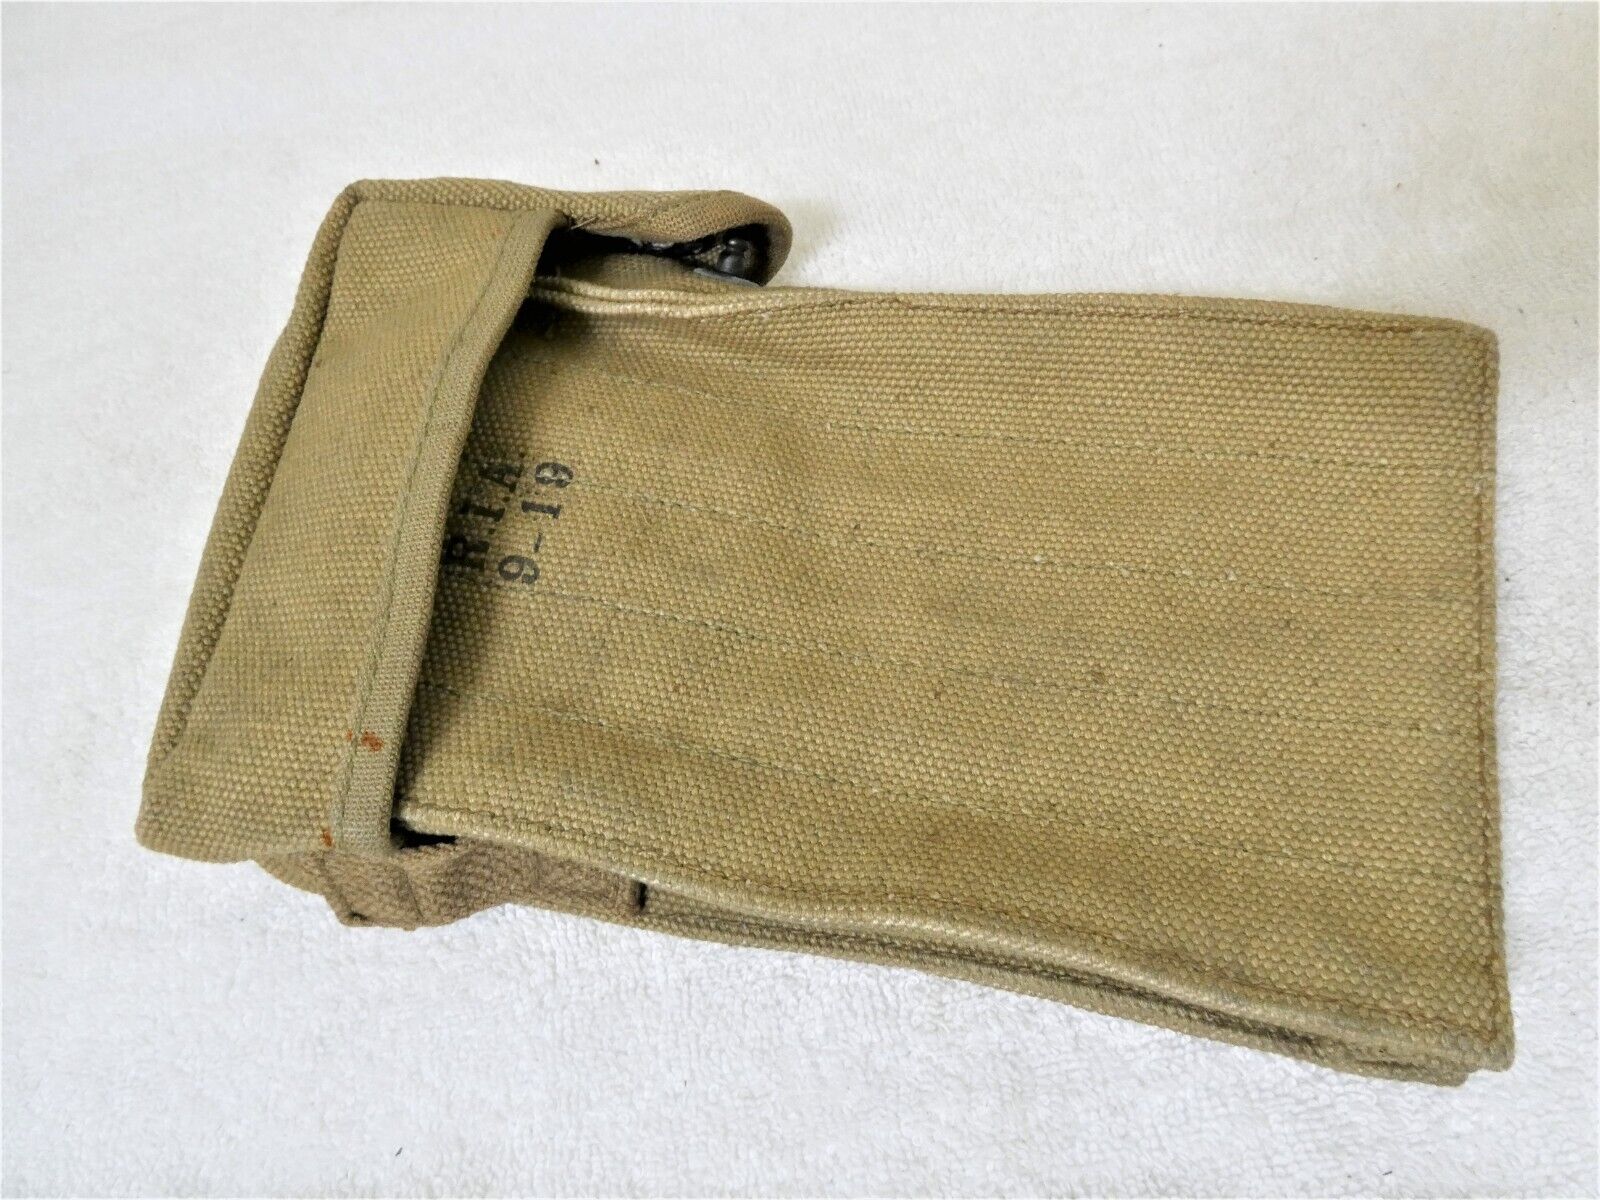 1919 WW1 US Military Rock Island Arsenal Peterson Device Canvas Pouch